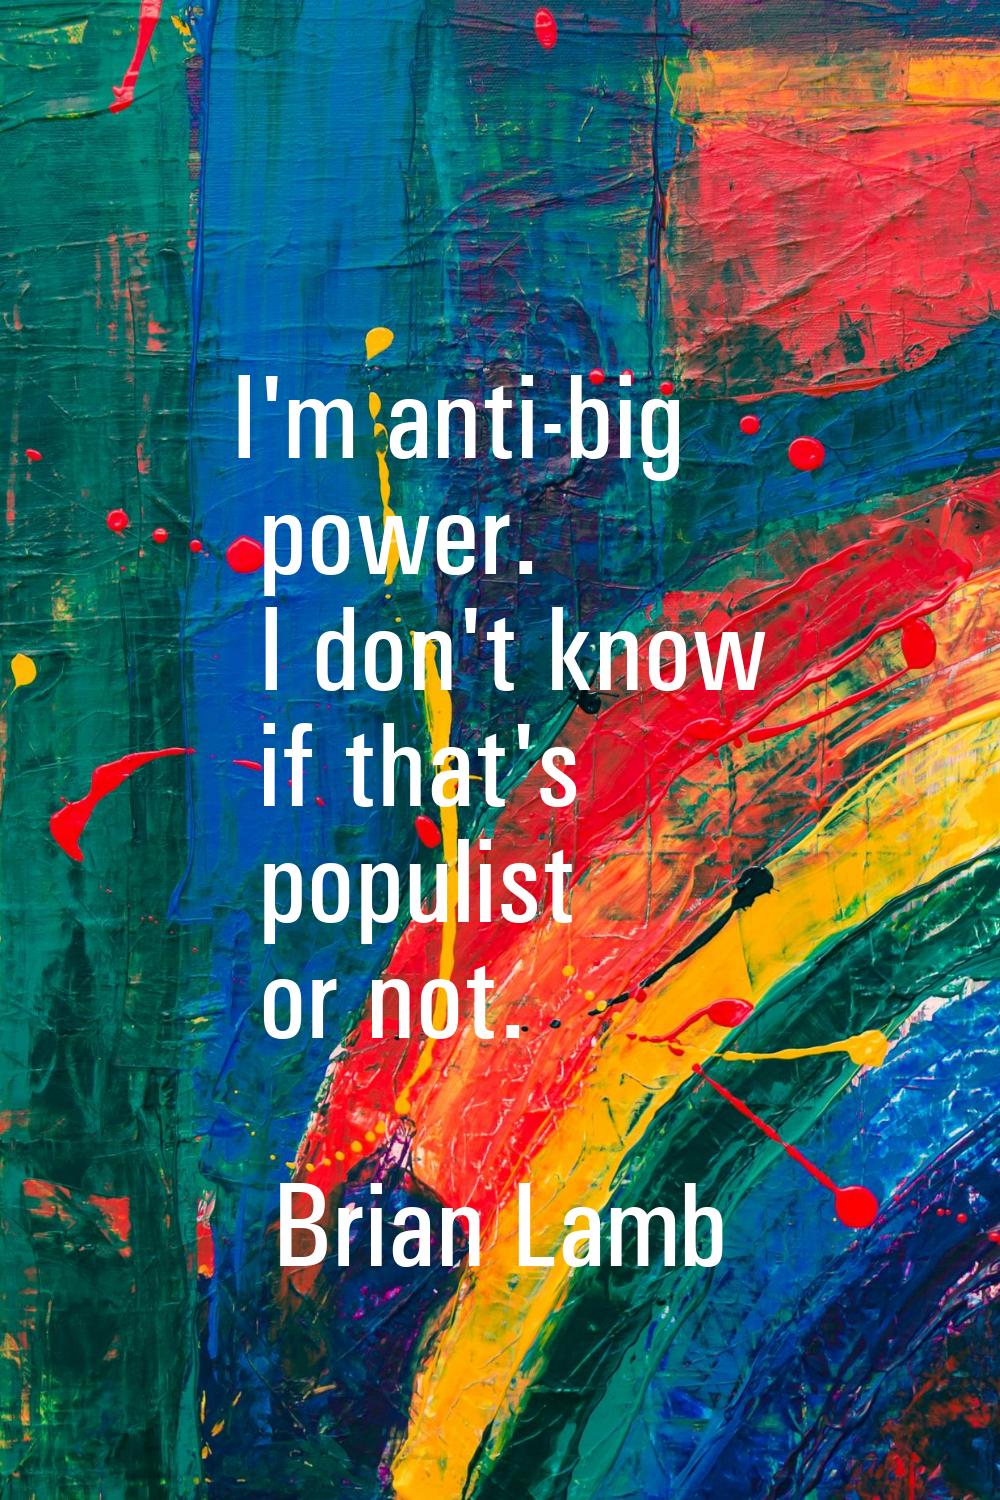 I'm anti-big power. I don't know if that's populist or not.